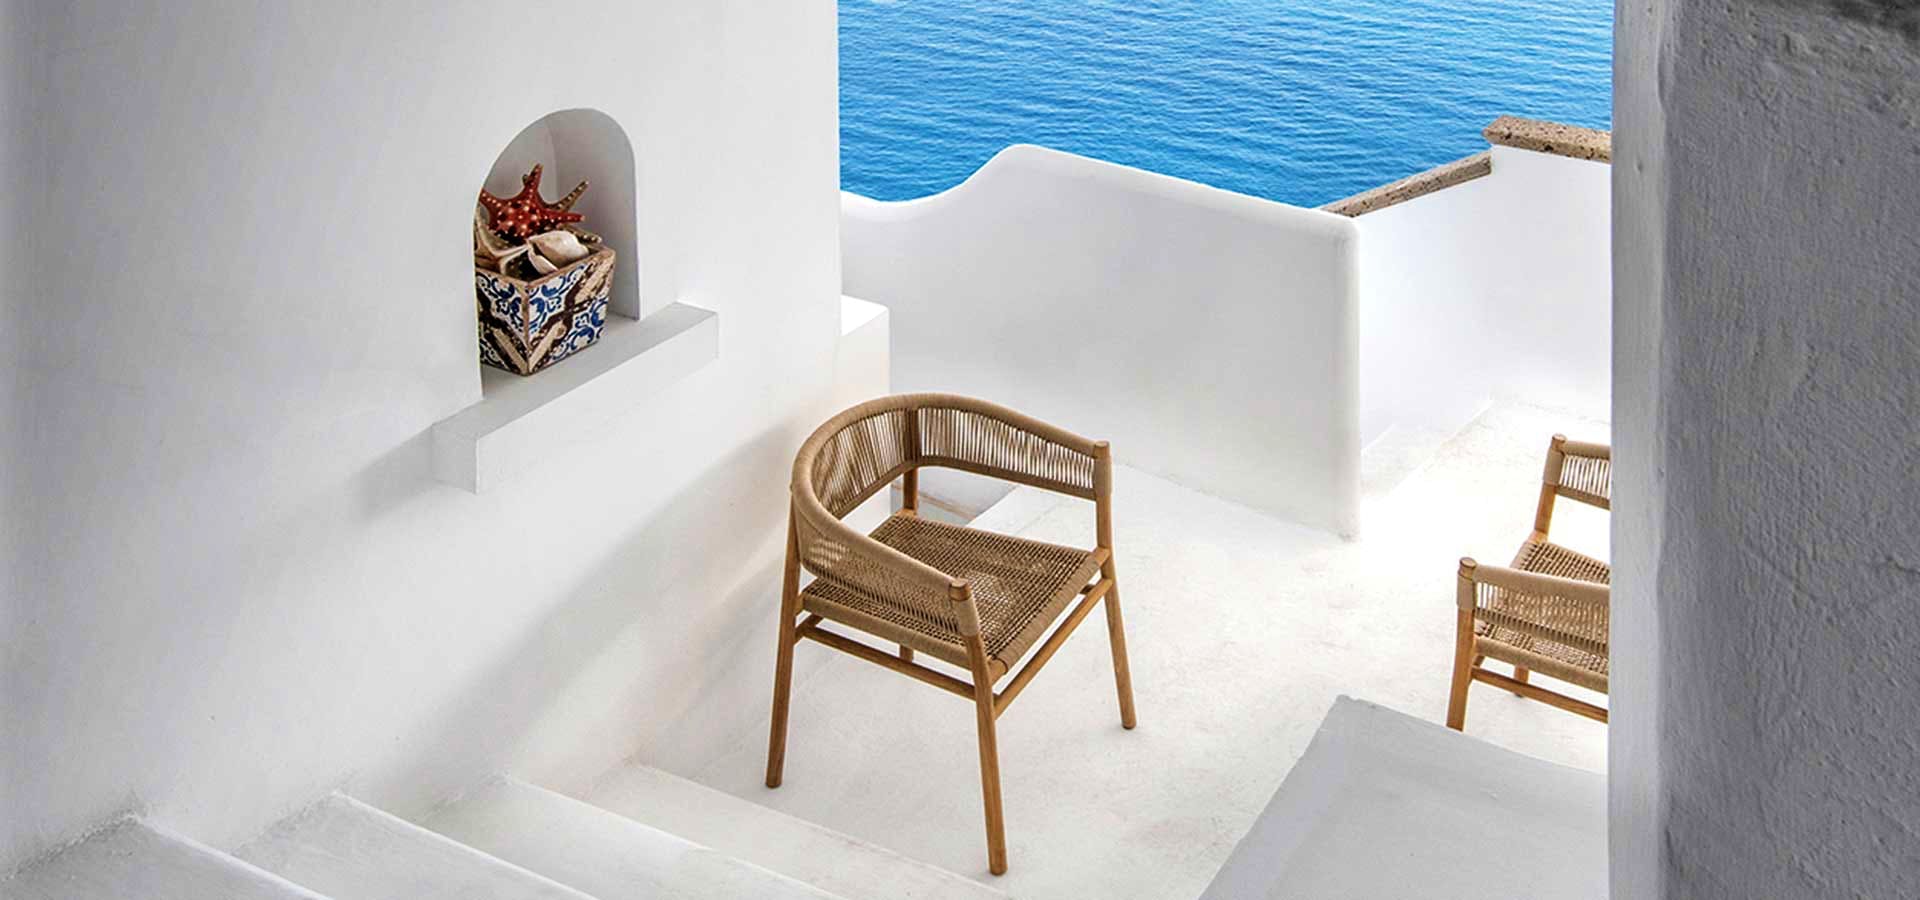 Image number 32 of the current section of Outdoors spaces that break design boundaries with indoors of Cosentino USA